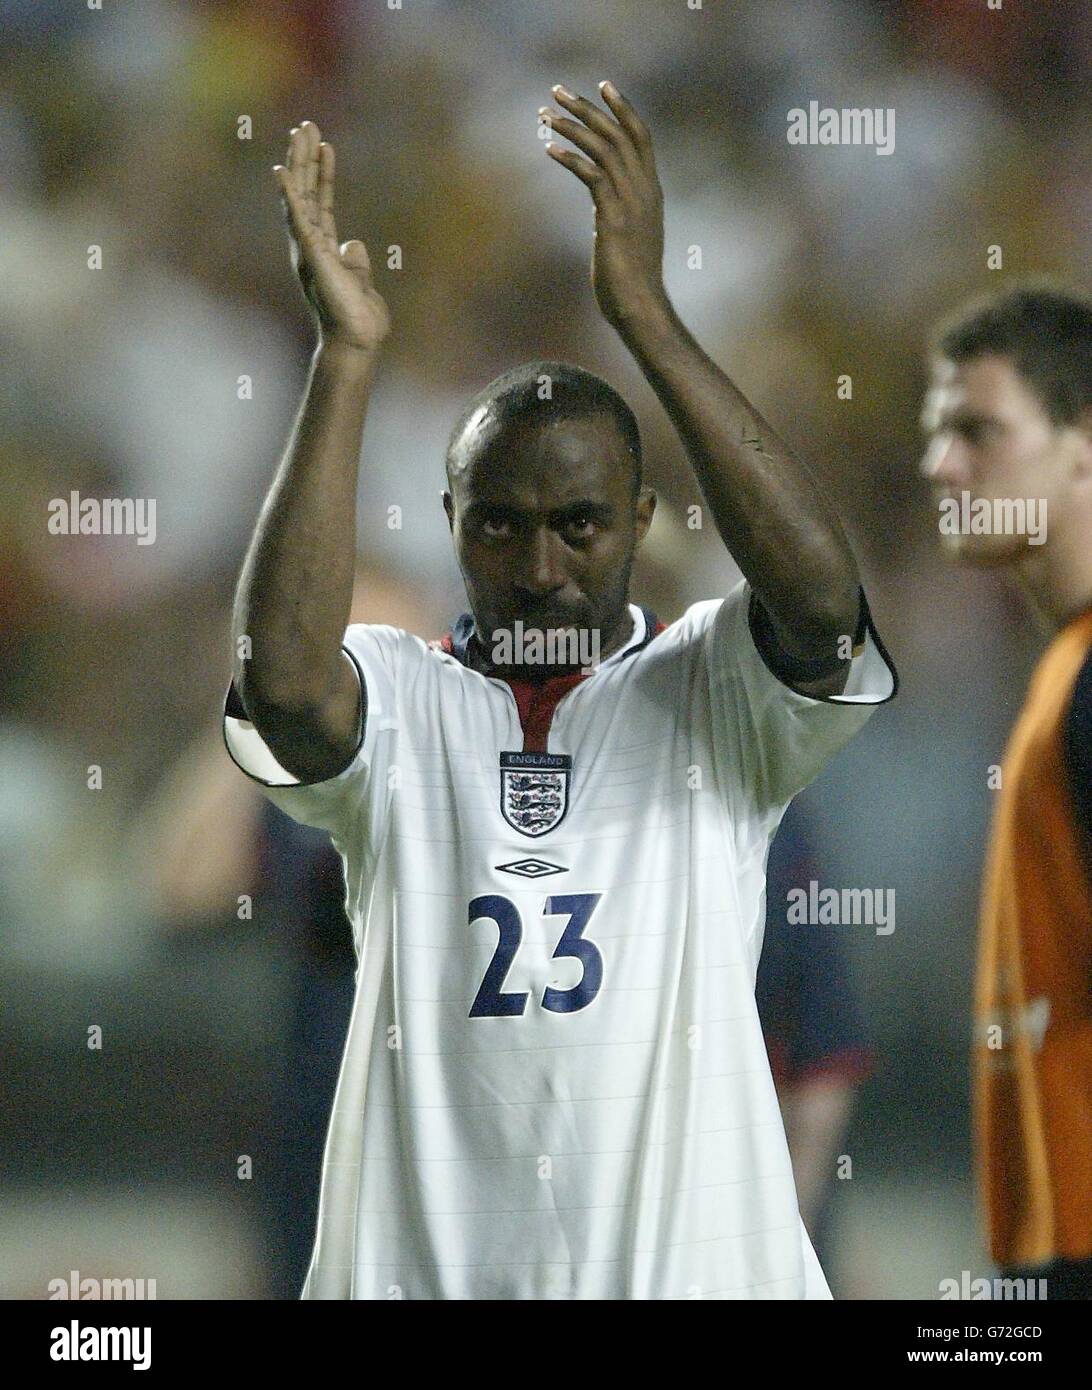 England's Darius Vassell after missing a penalty against Portugal during the Euro 2004 quarter-final match at the Estadio da Luz, Lisbon, Portugal. England lost to Portugal 6-5 on penalties after the match ended in a 2-2 draw following extra-time. Stock Photo